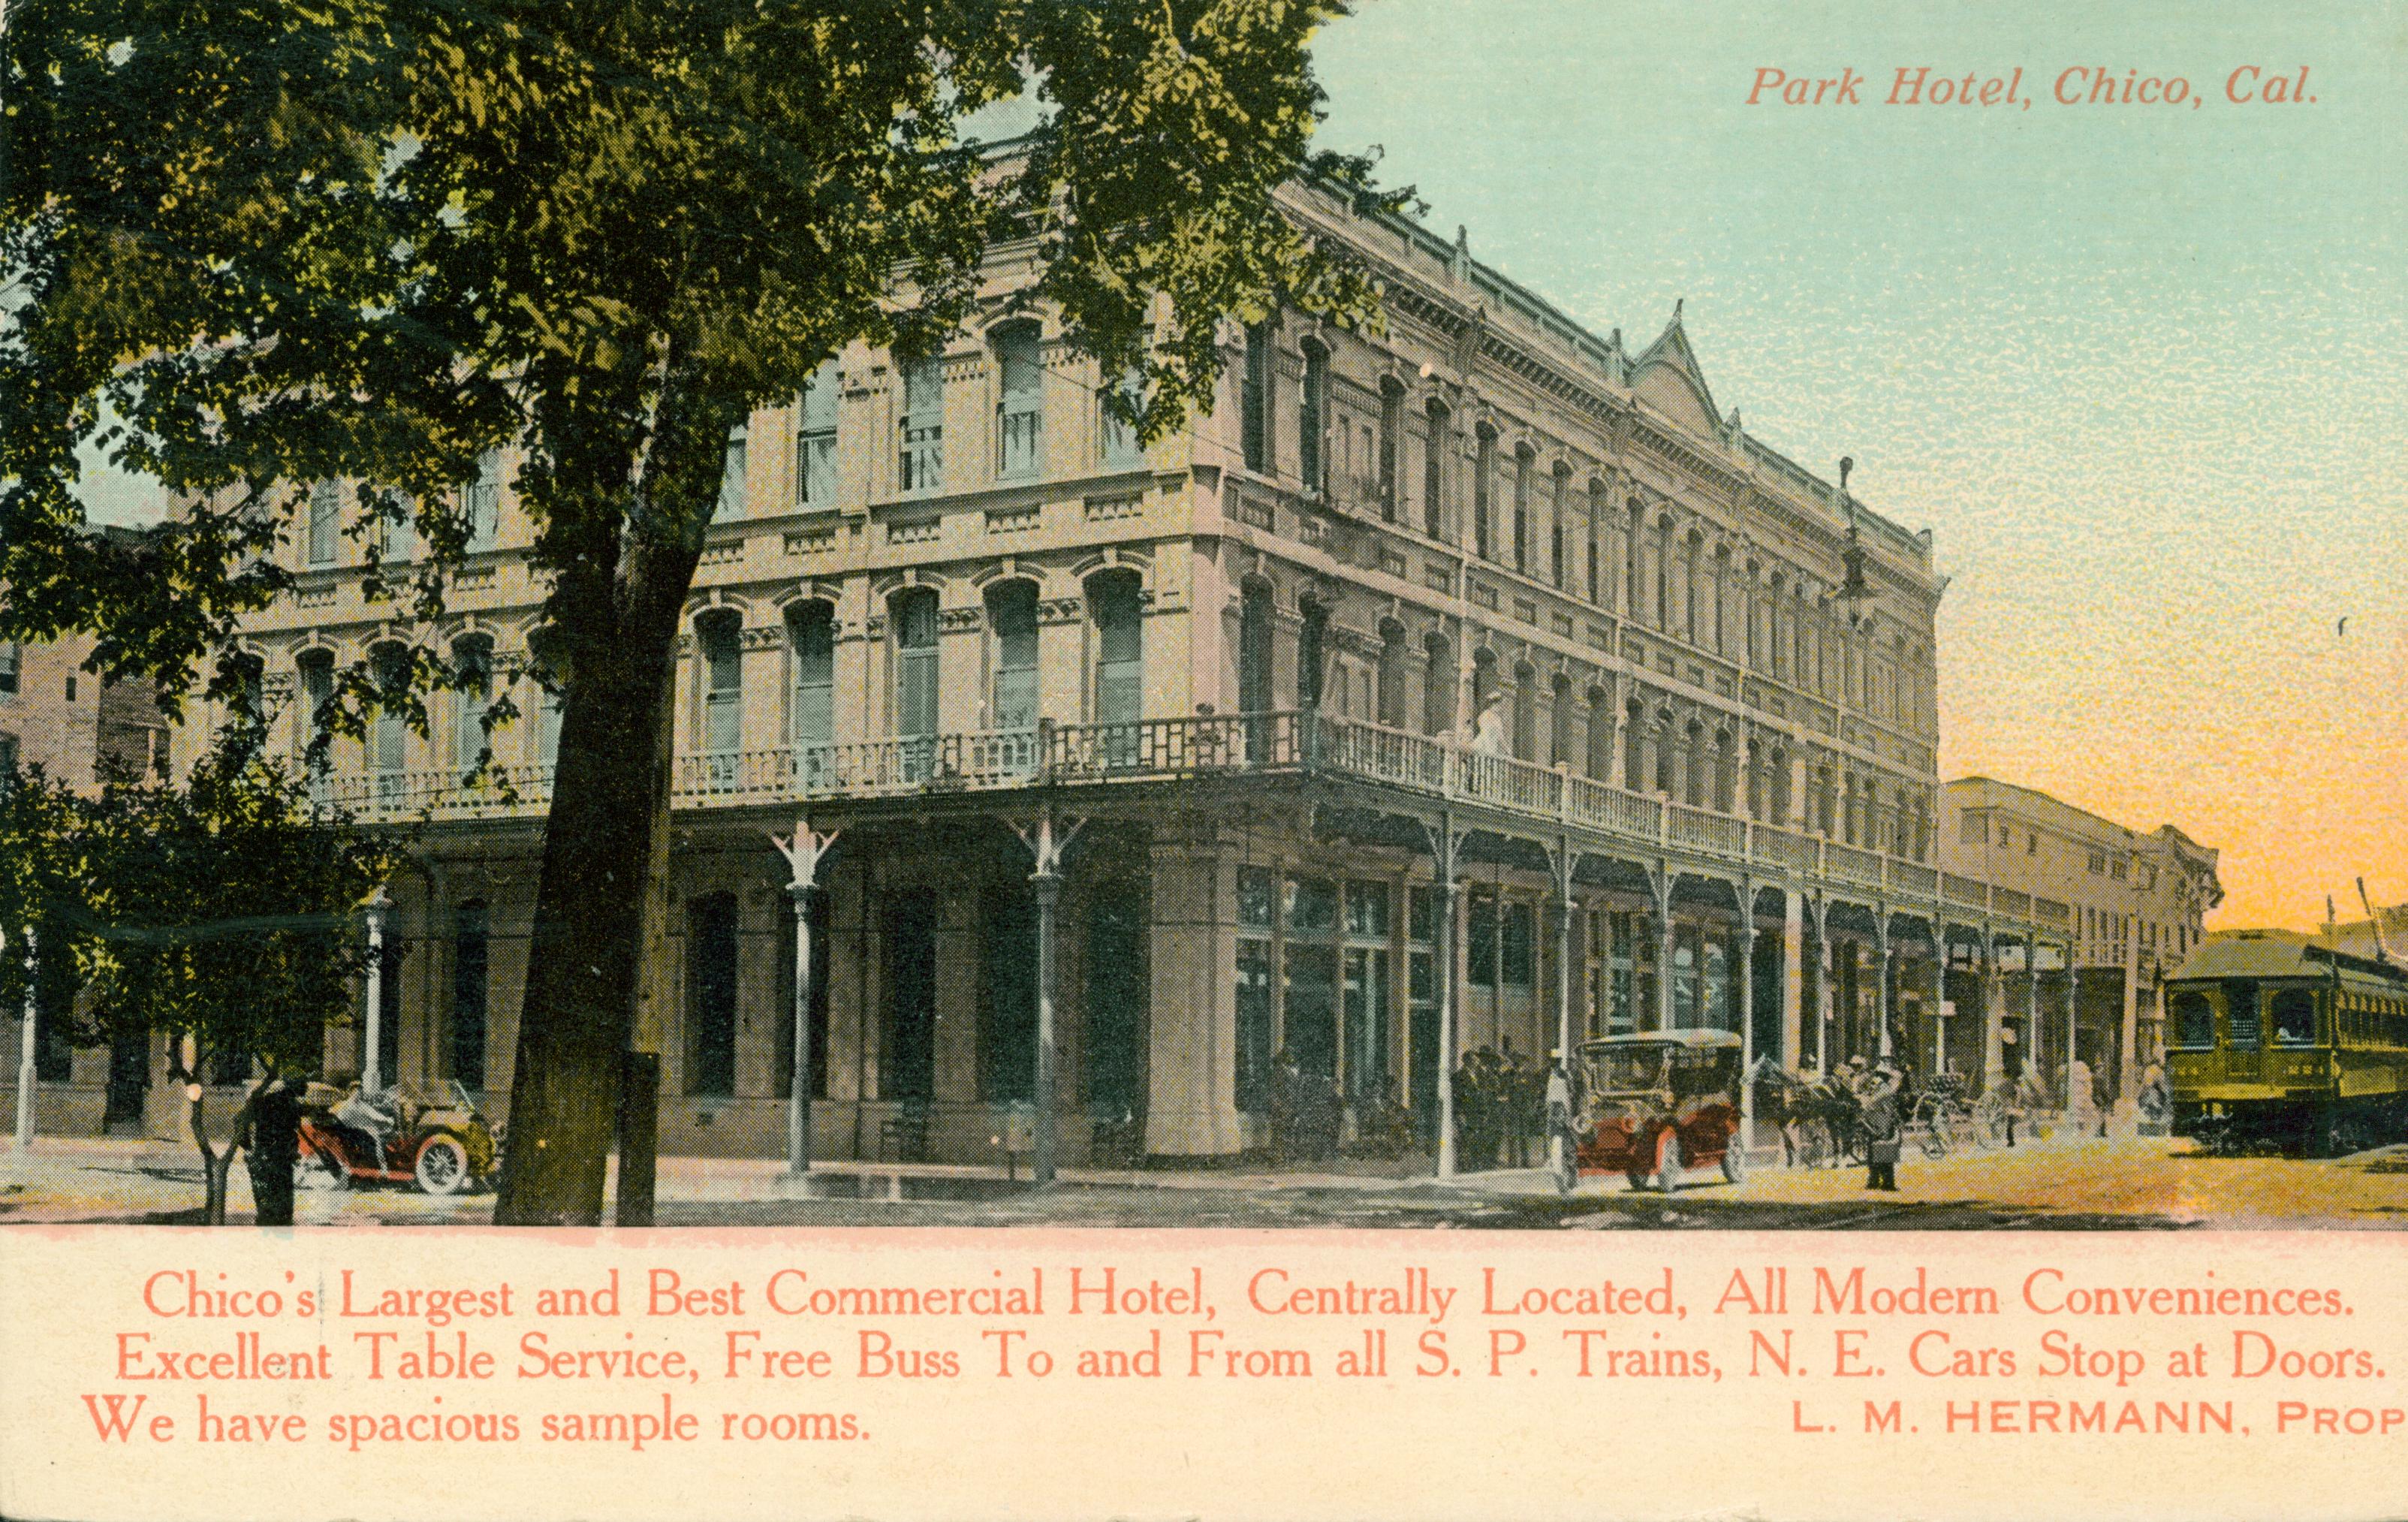 Shows a corner view of the Park Hotel